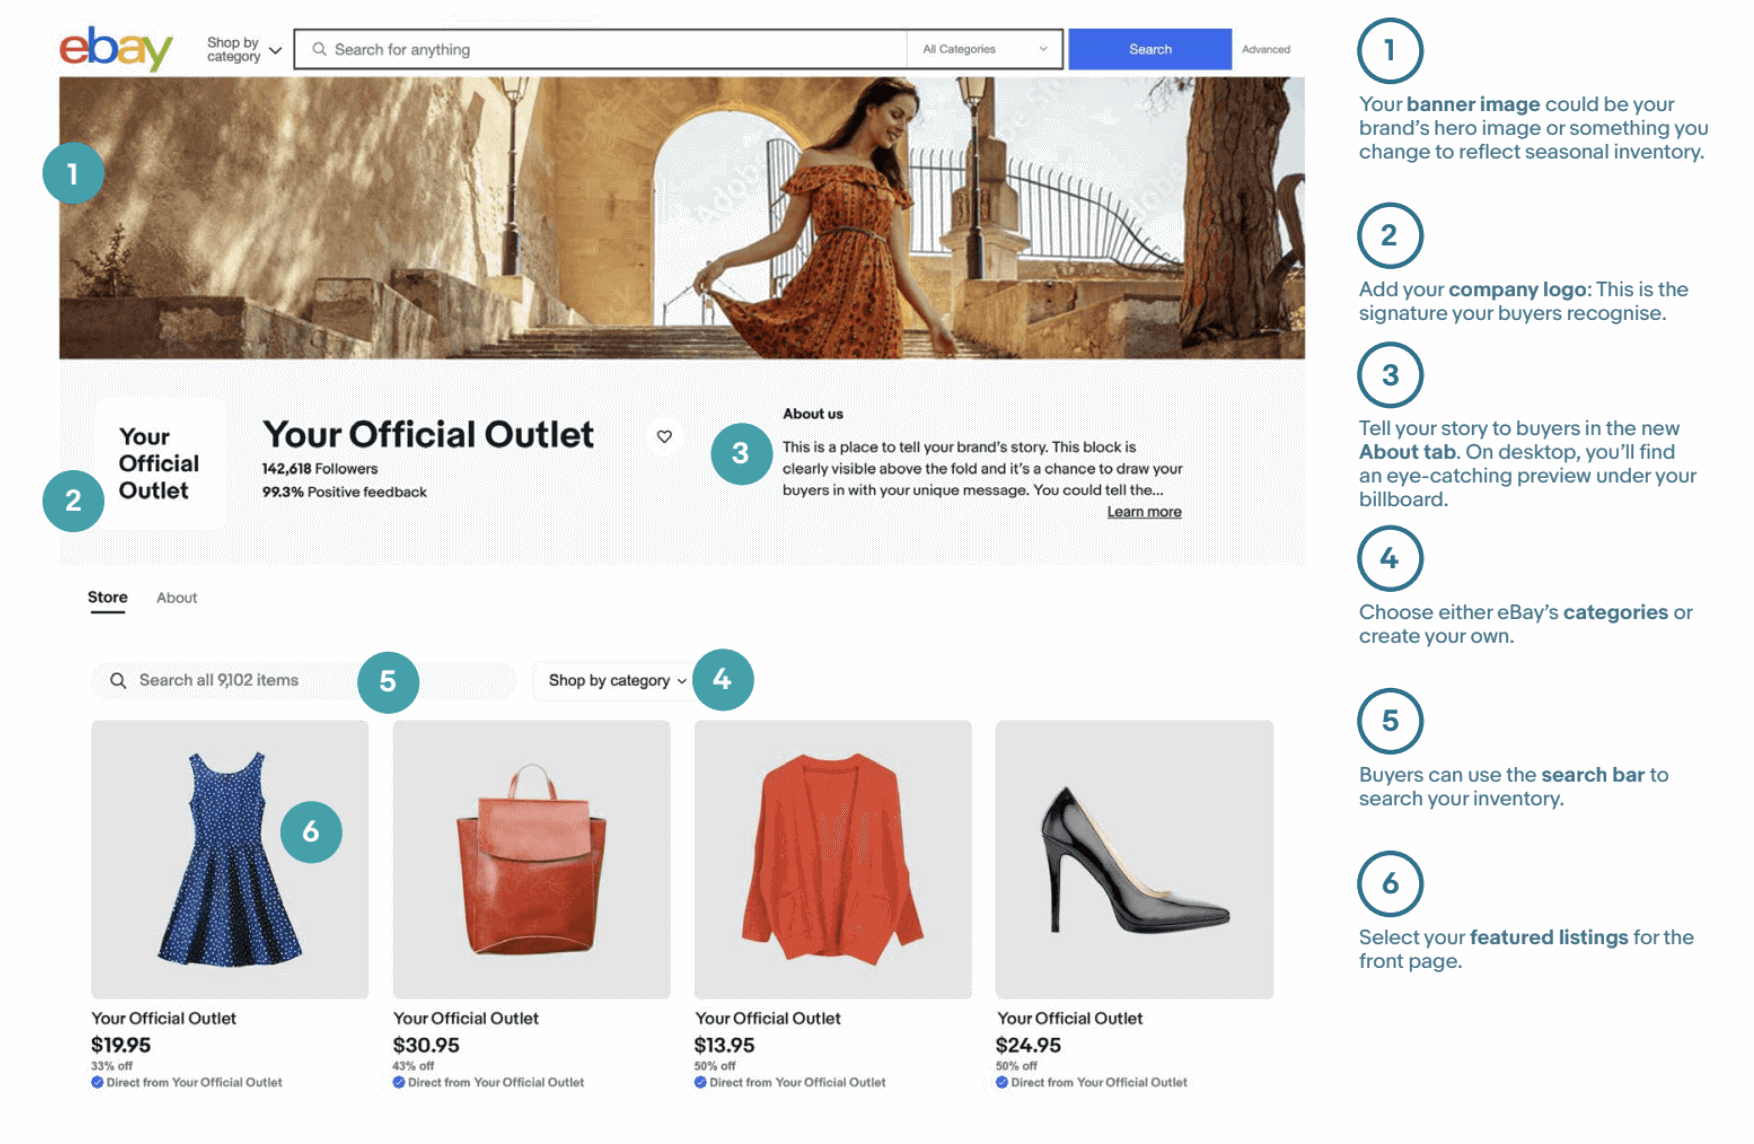 Screenshot of sample eBay Store with numbered list of items: 1. banner image, 2. company logo, 3. About us, 4. categories, 5. search bar, and 6. featured listings.